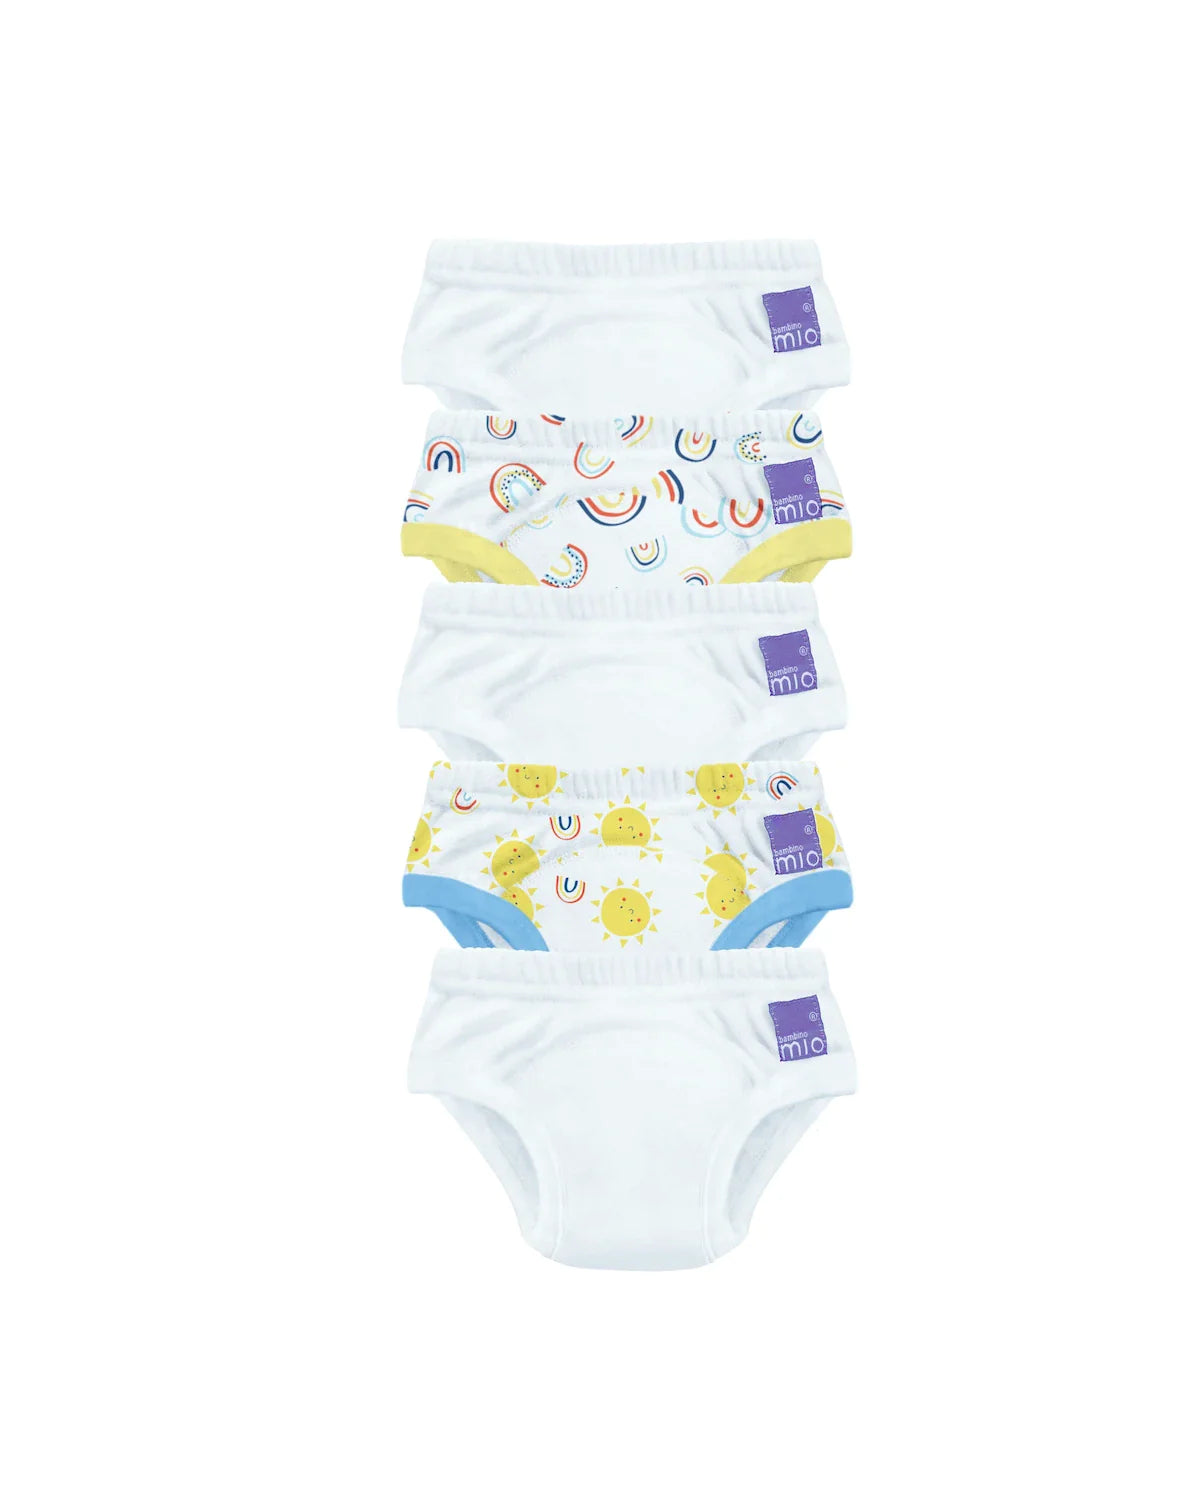 Buy 4 Pack Toddler Potty Training Pants Six Layered Cotton